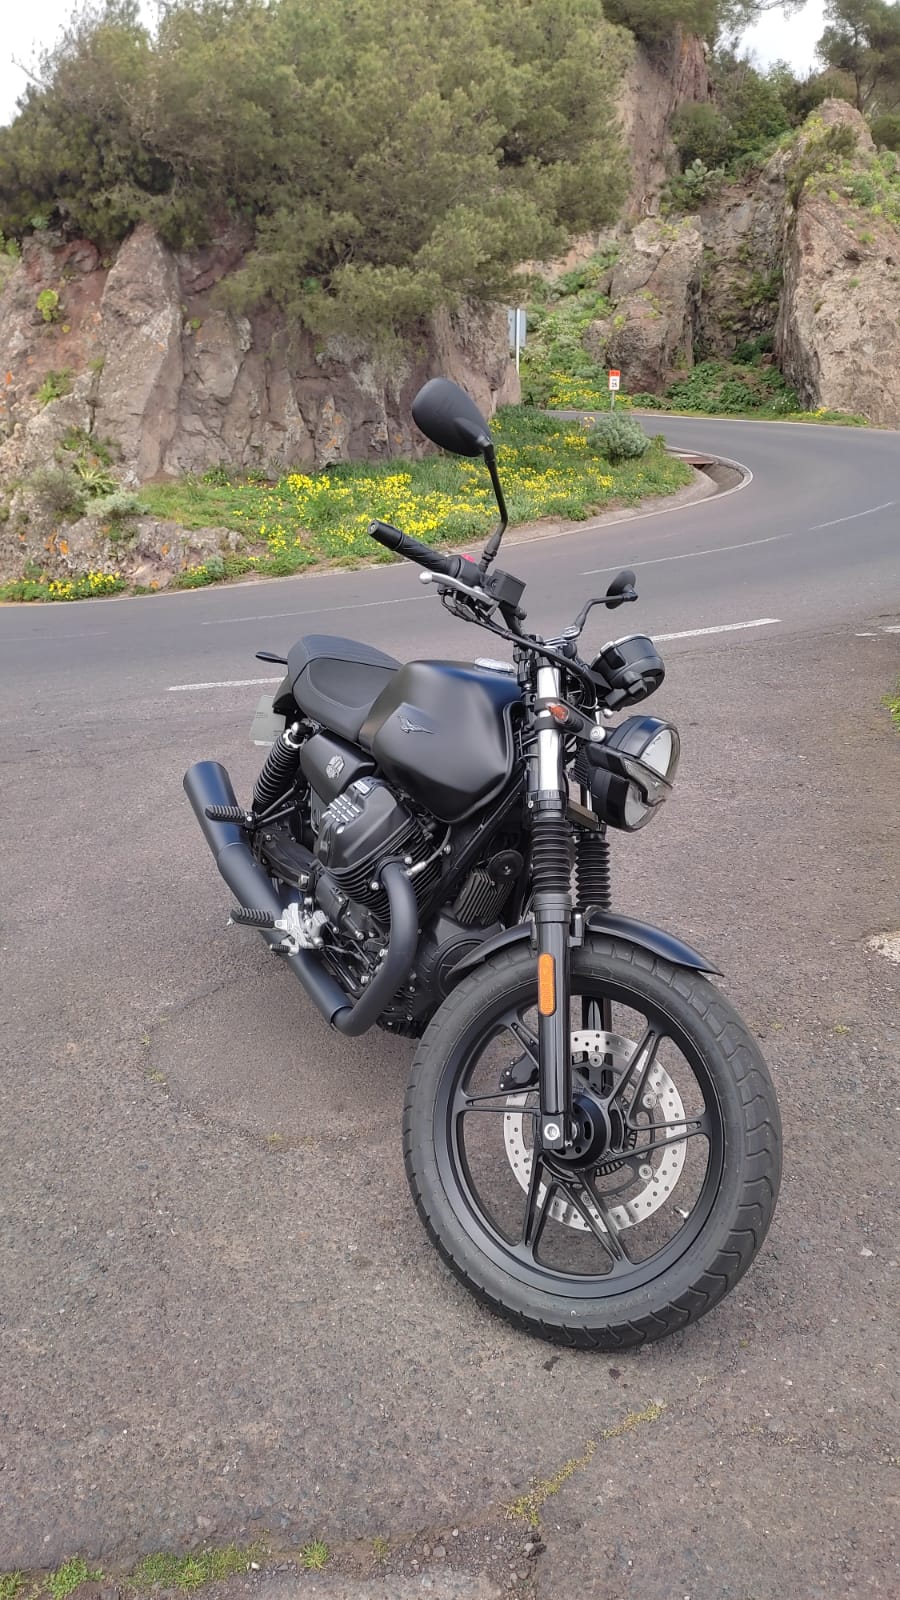 A black motorcycle is parked on the side of a road.